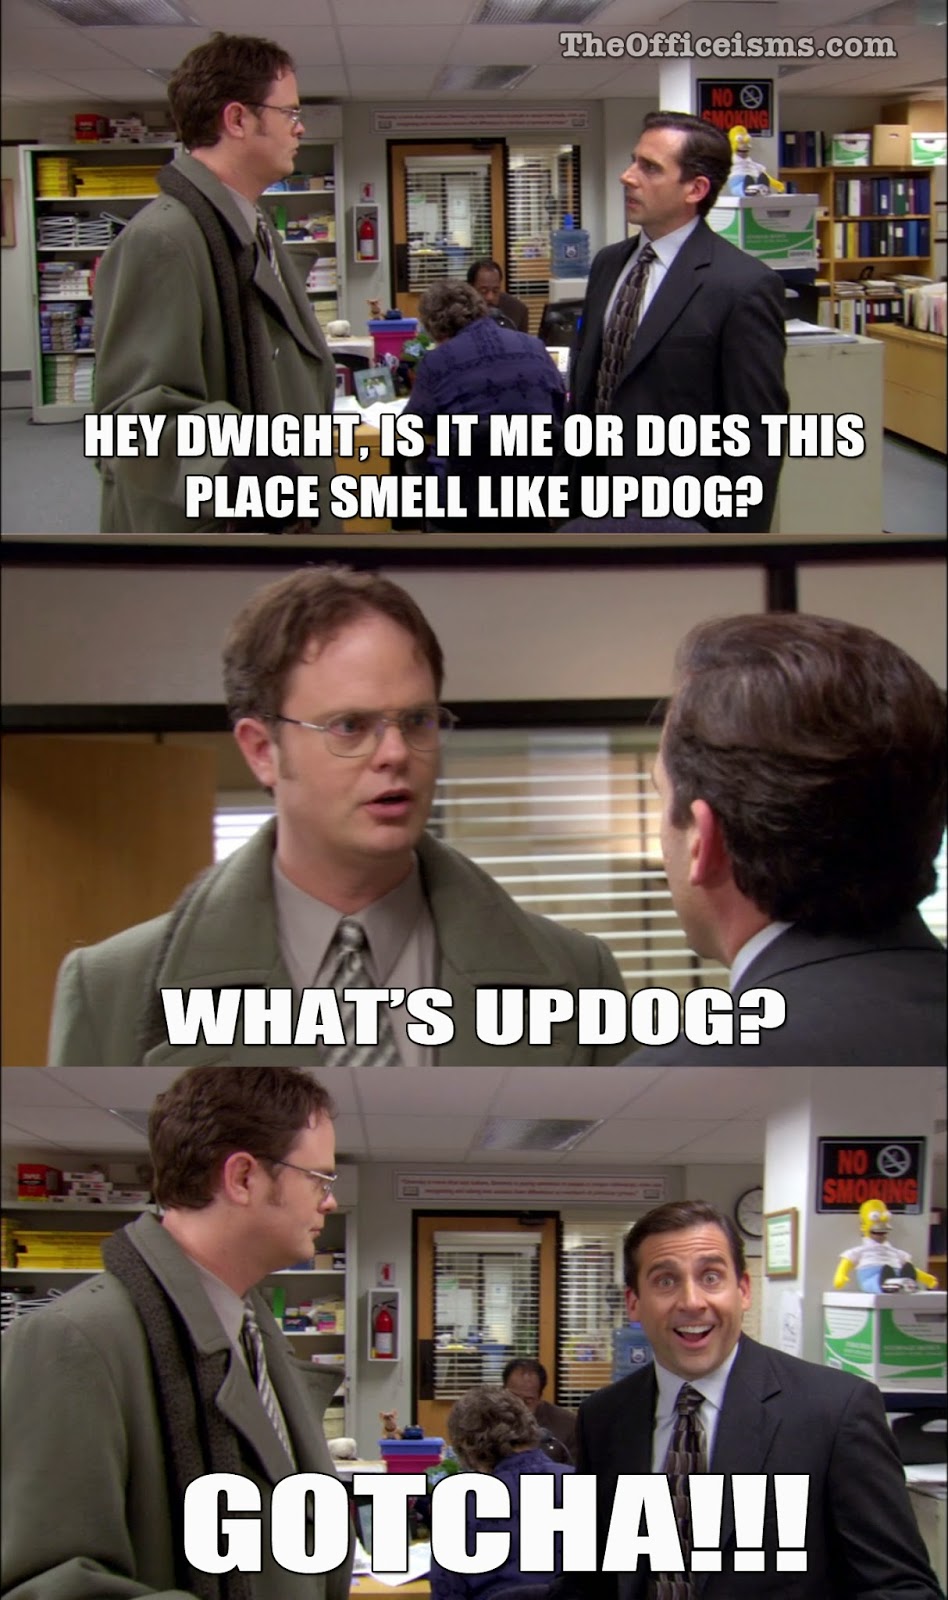 "What's updog?"